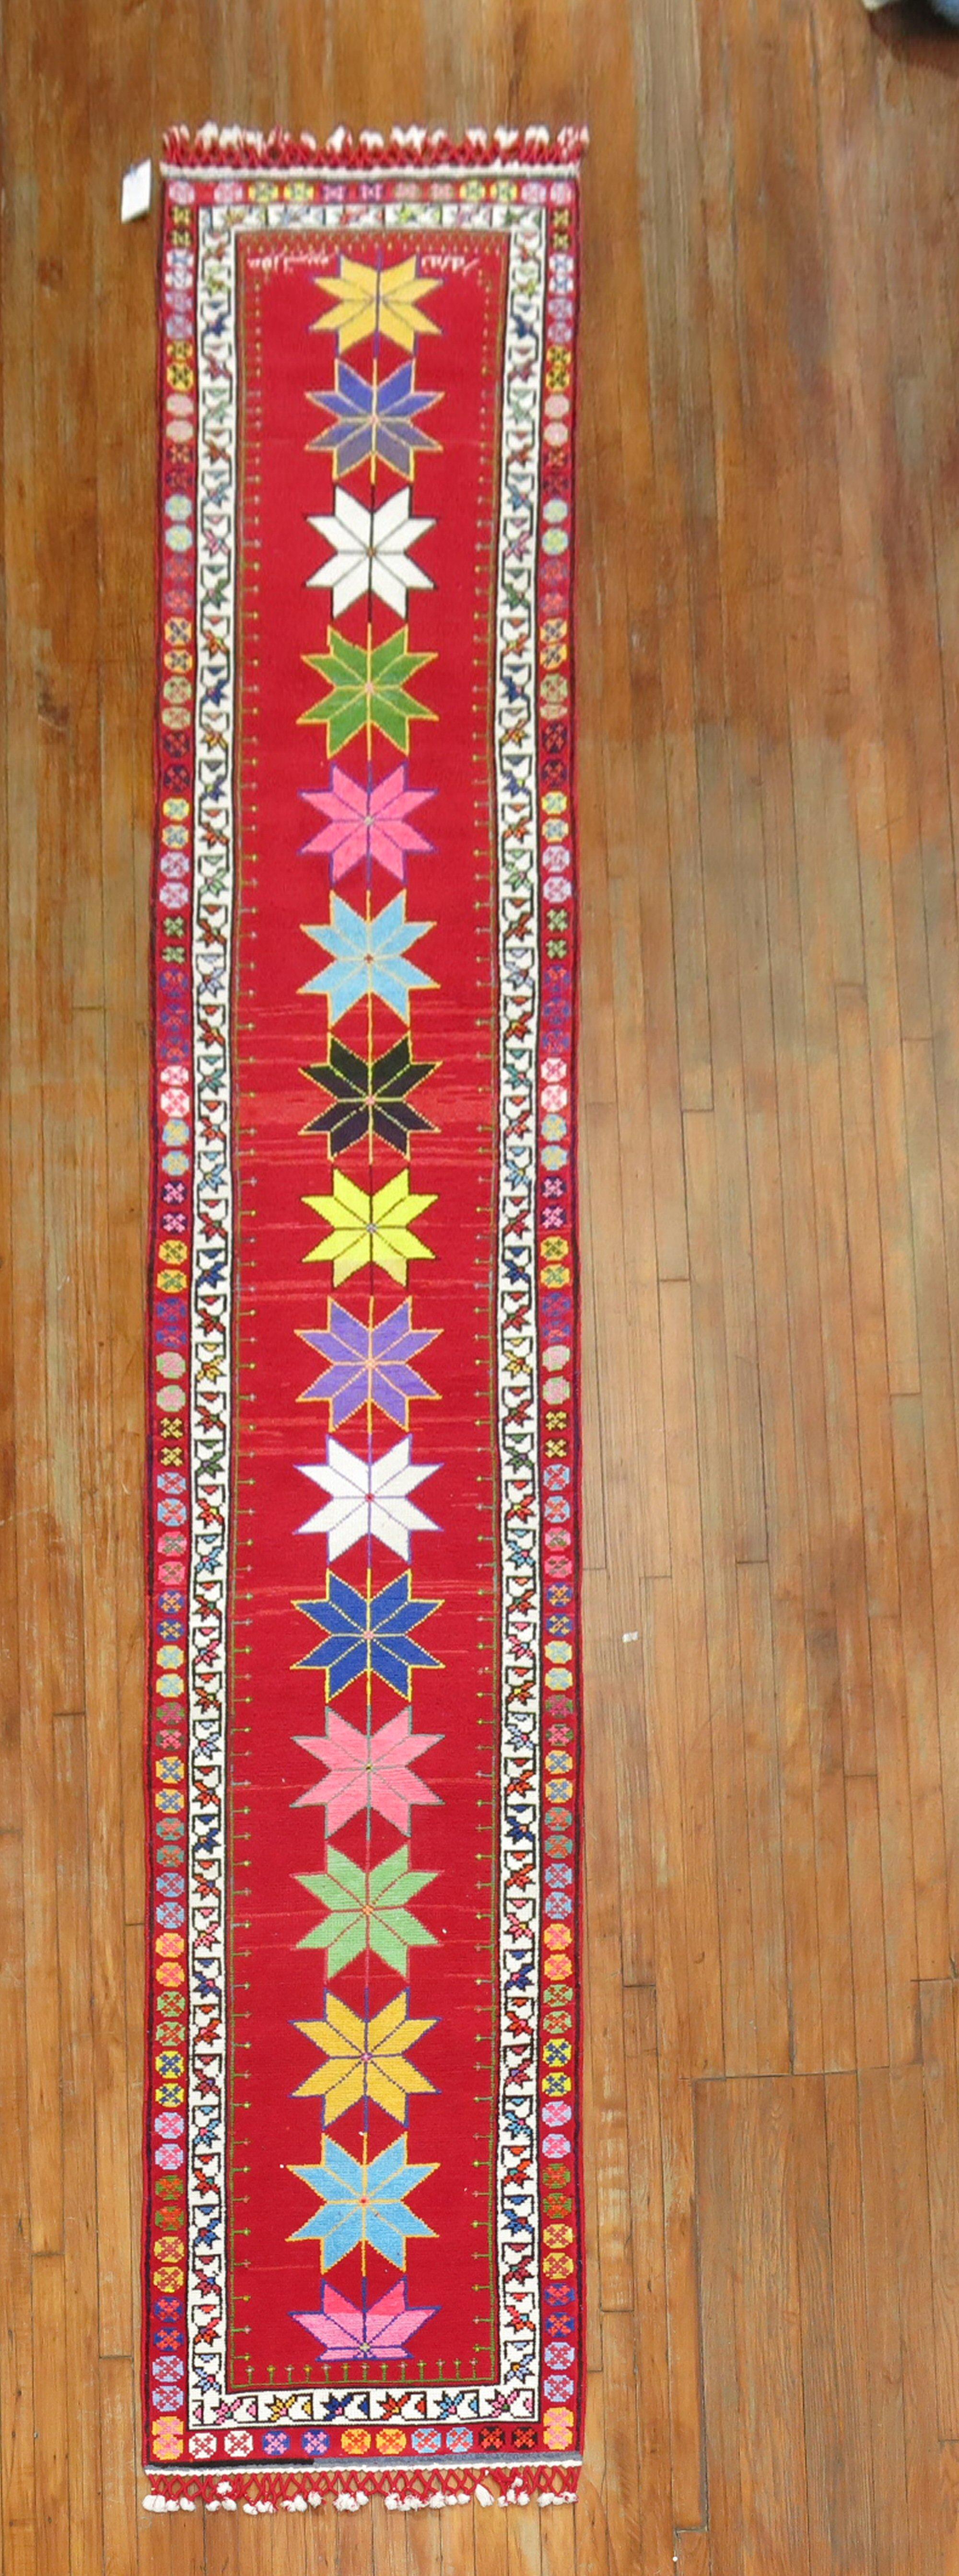 A funky colorful mid-20th century one of a kind Turkish runner woven in central Turkey. The weaver included longer fringes on each side giving it a unique characteristic.

Measures: 2'7'' x 14'3''.